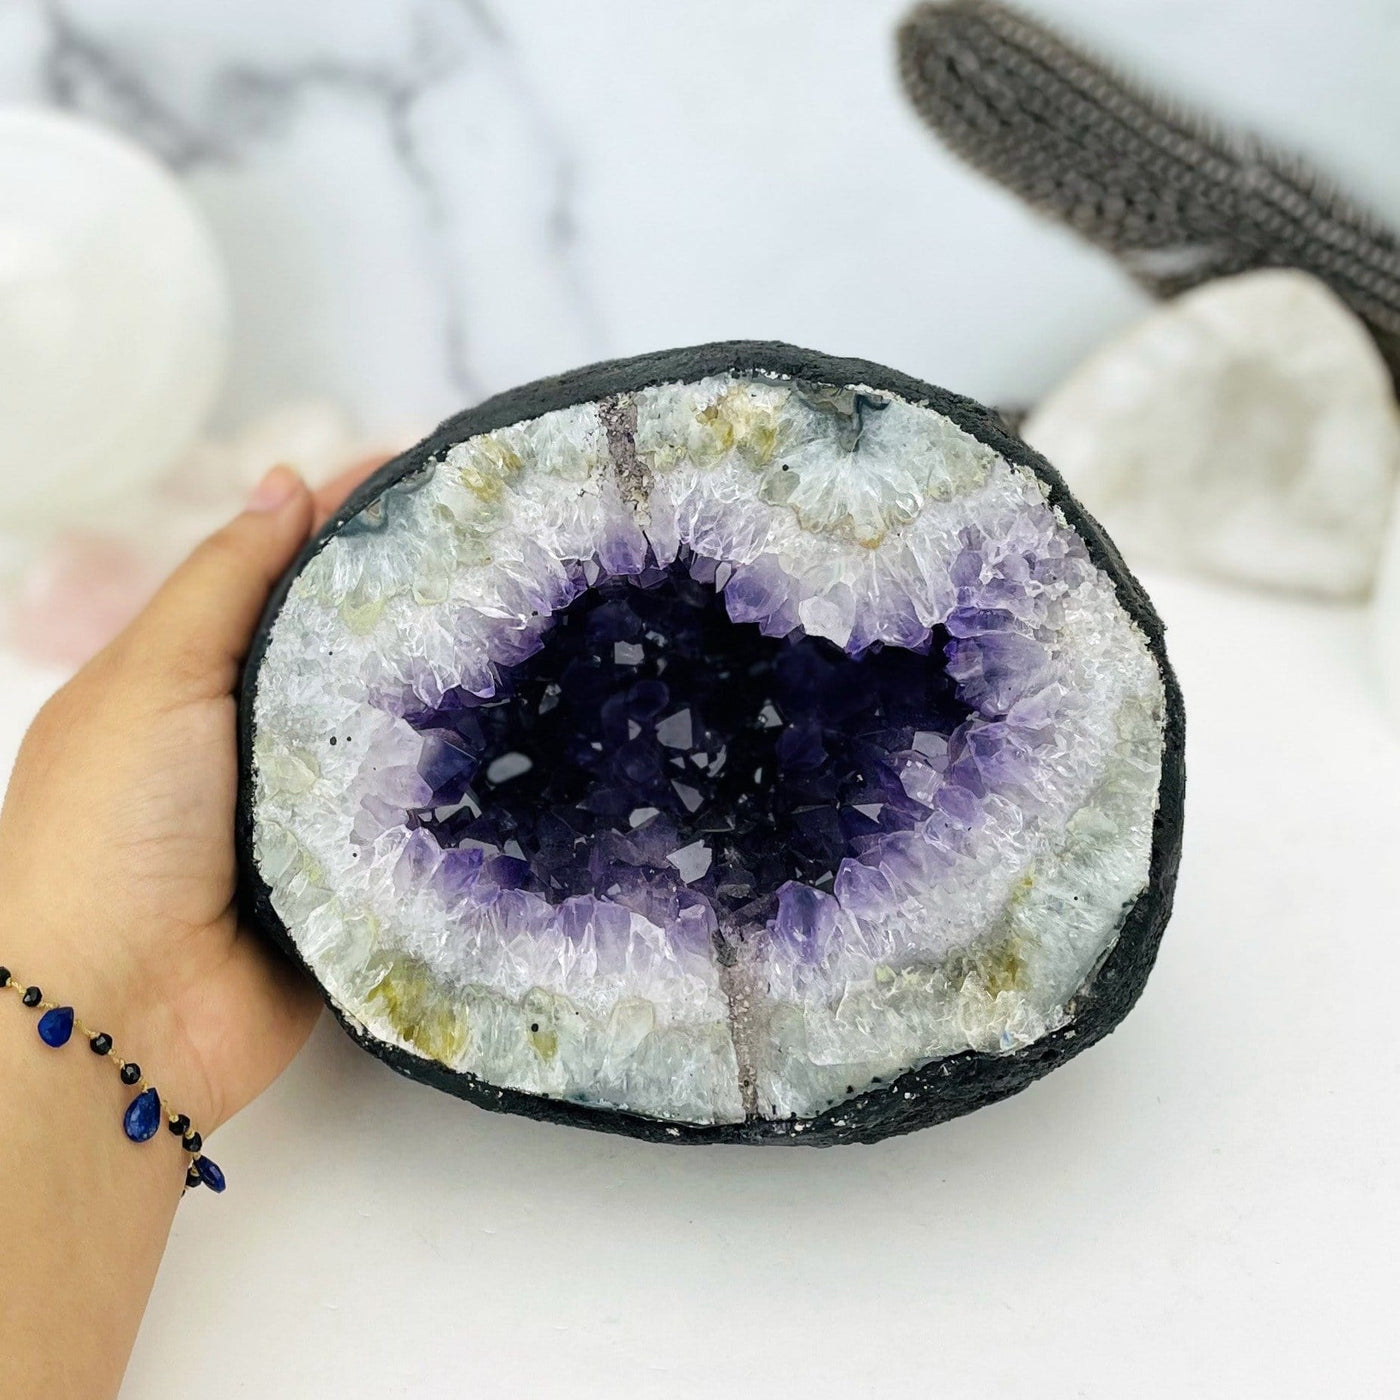 Amethyst geode.  It is round with a black outside, followed by crystal white and amethyst purple druzy in the center.  